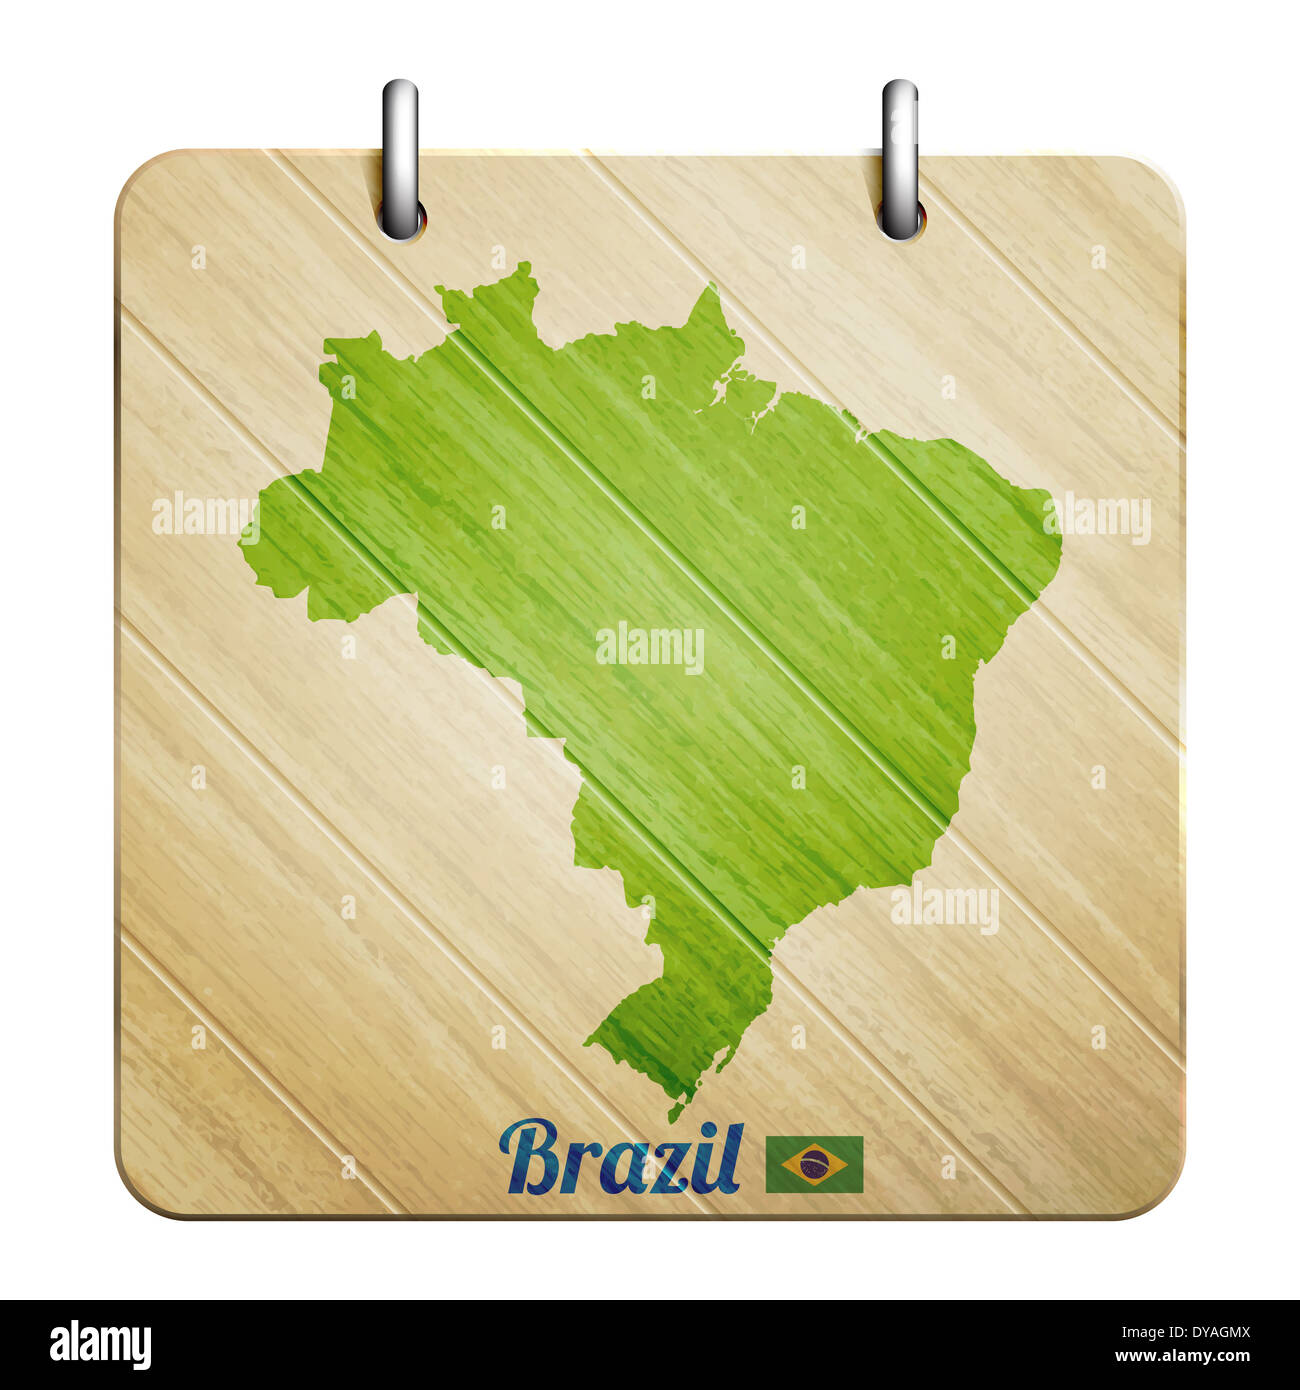 isolated wooden icon with brazil map and flag Stock Photo